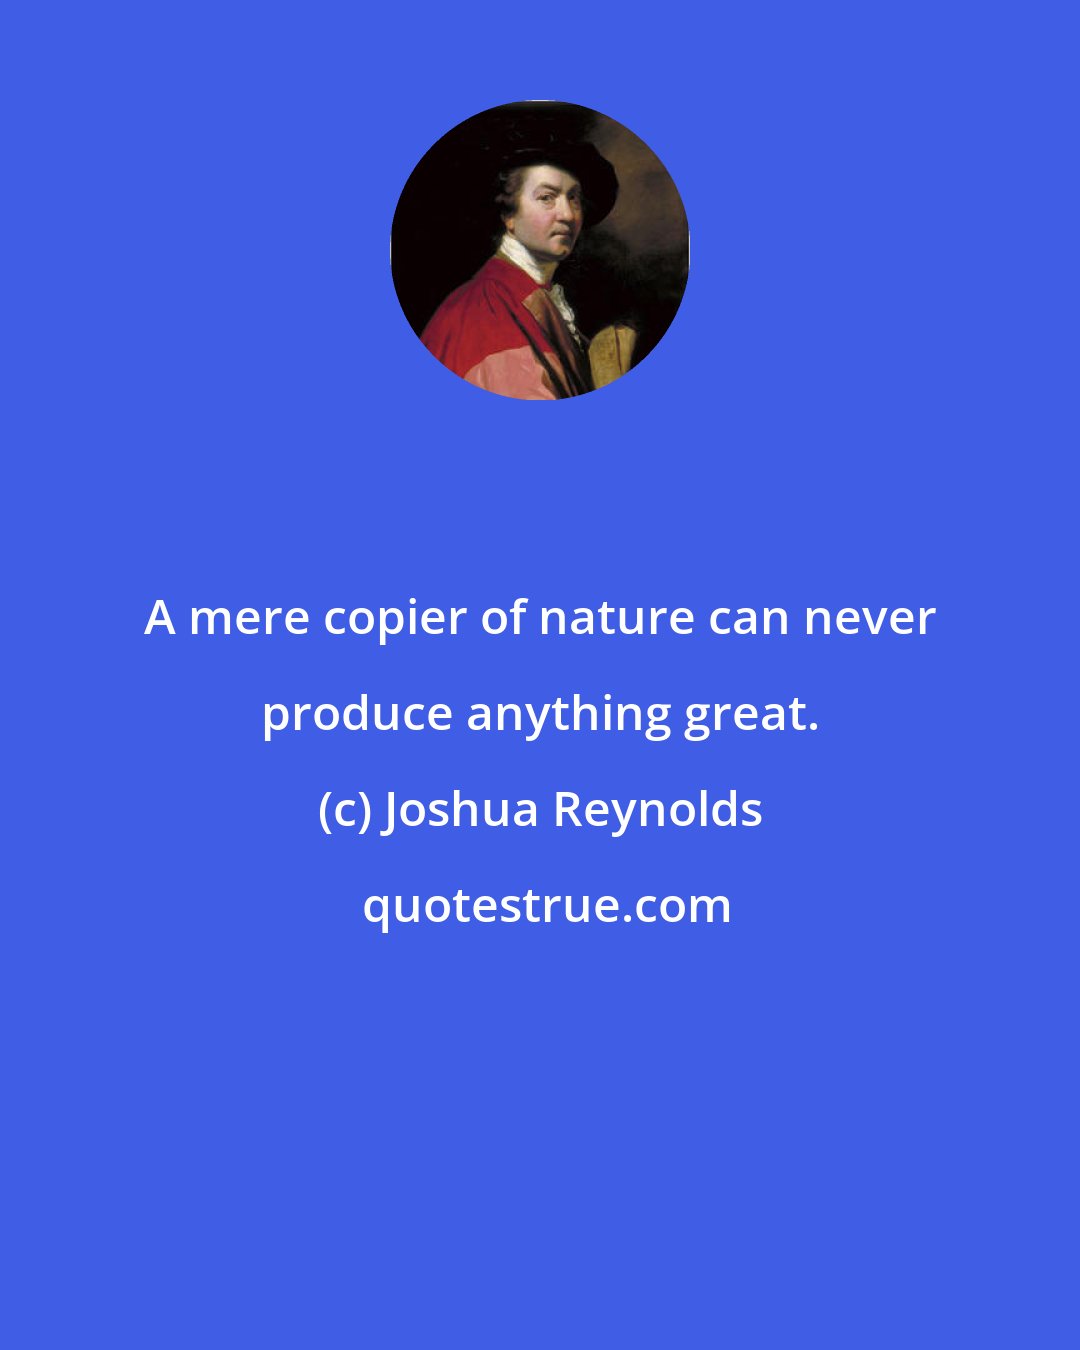 Joshua Reynolds: A mere copier of nature can never produce anything great.